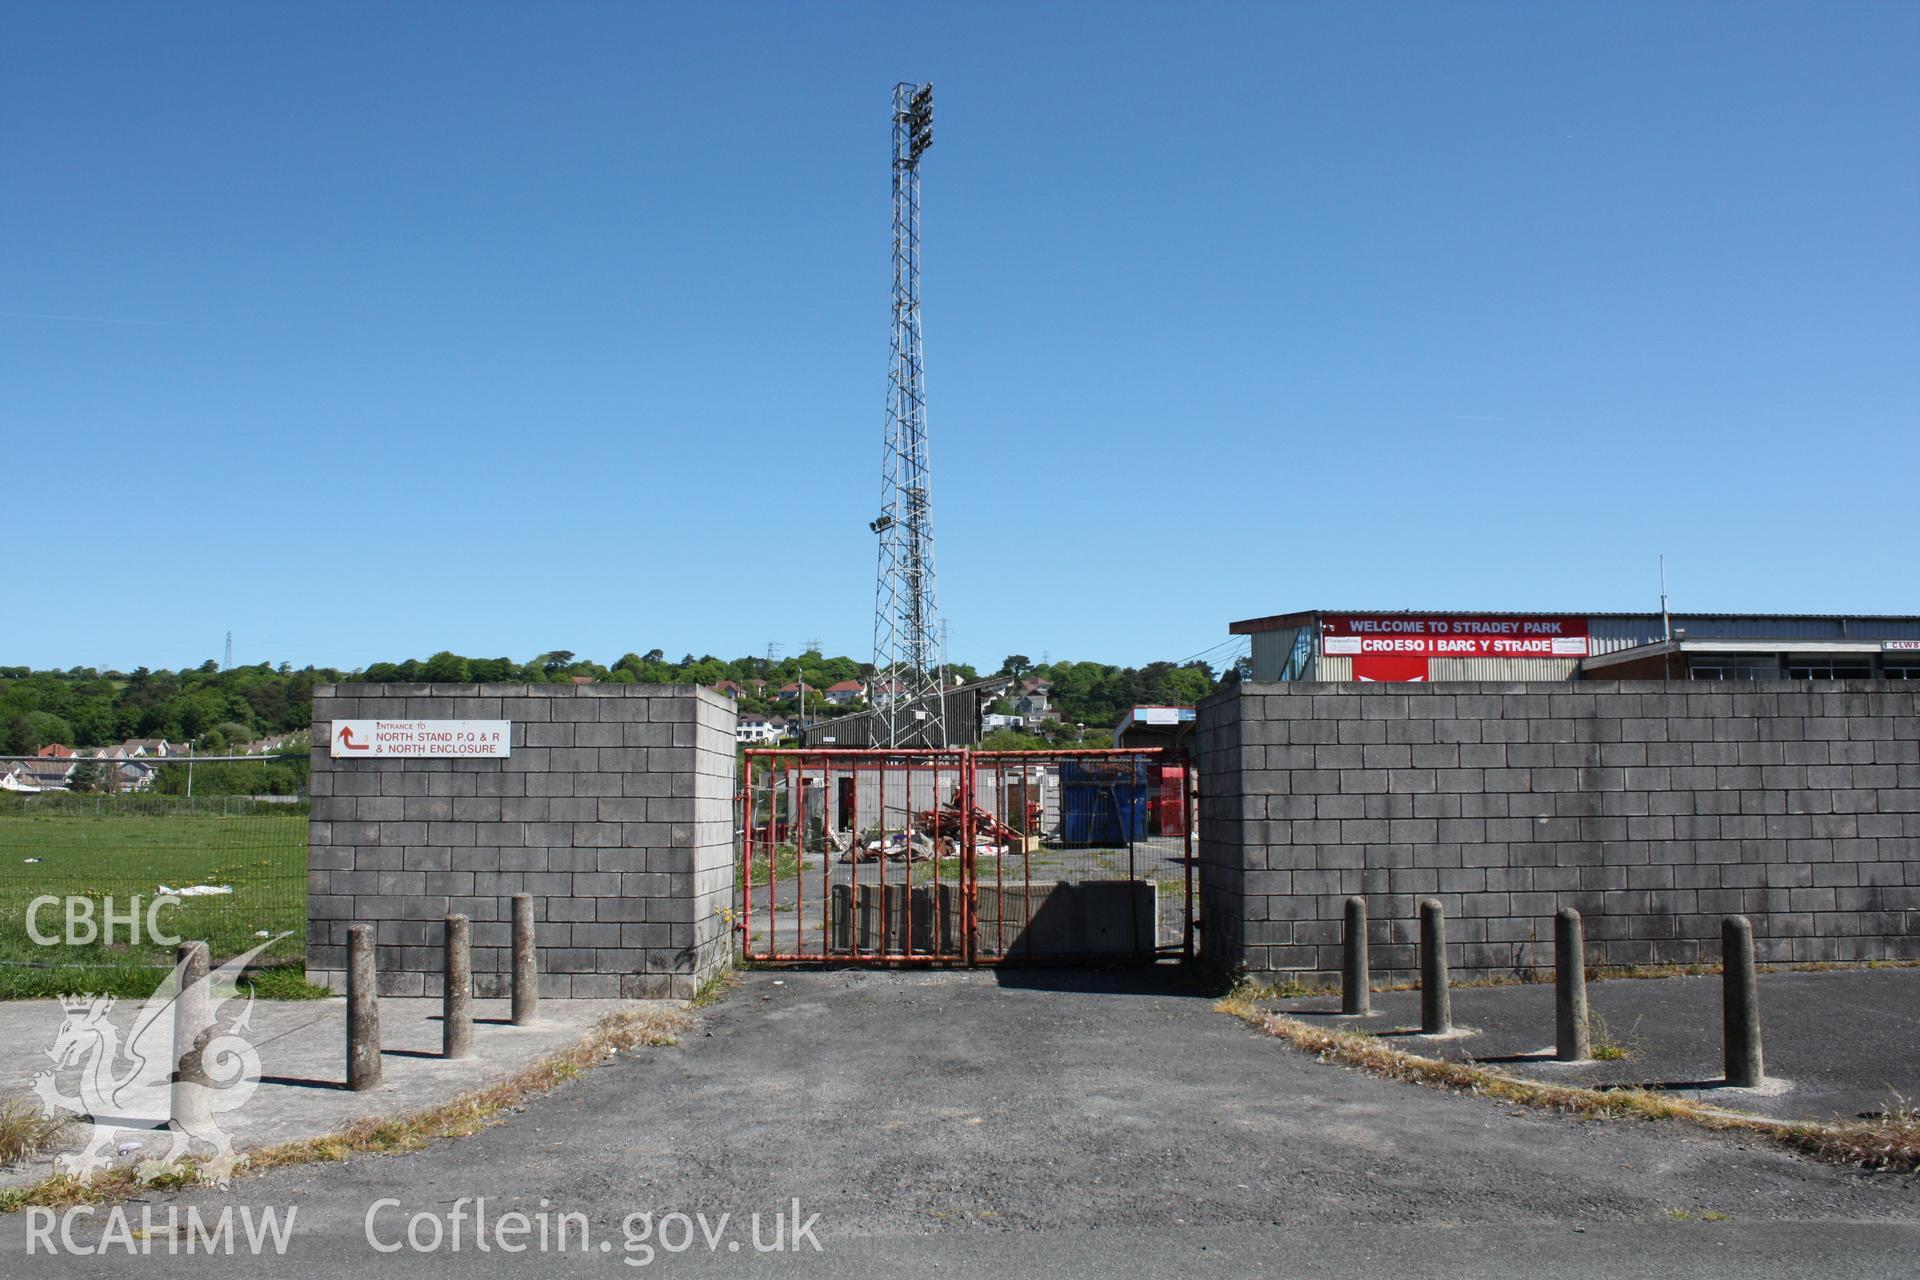 Pedestrian entrance to turnstiles 18-22 and the south-west corner